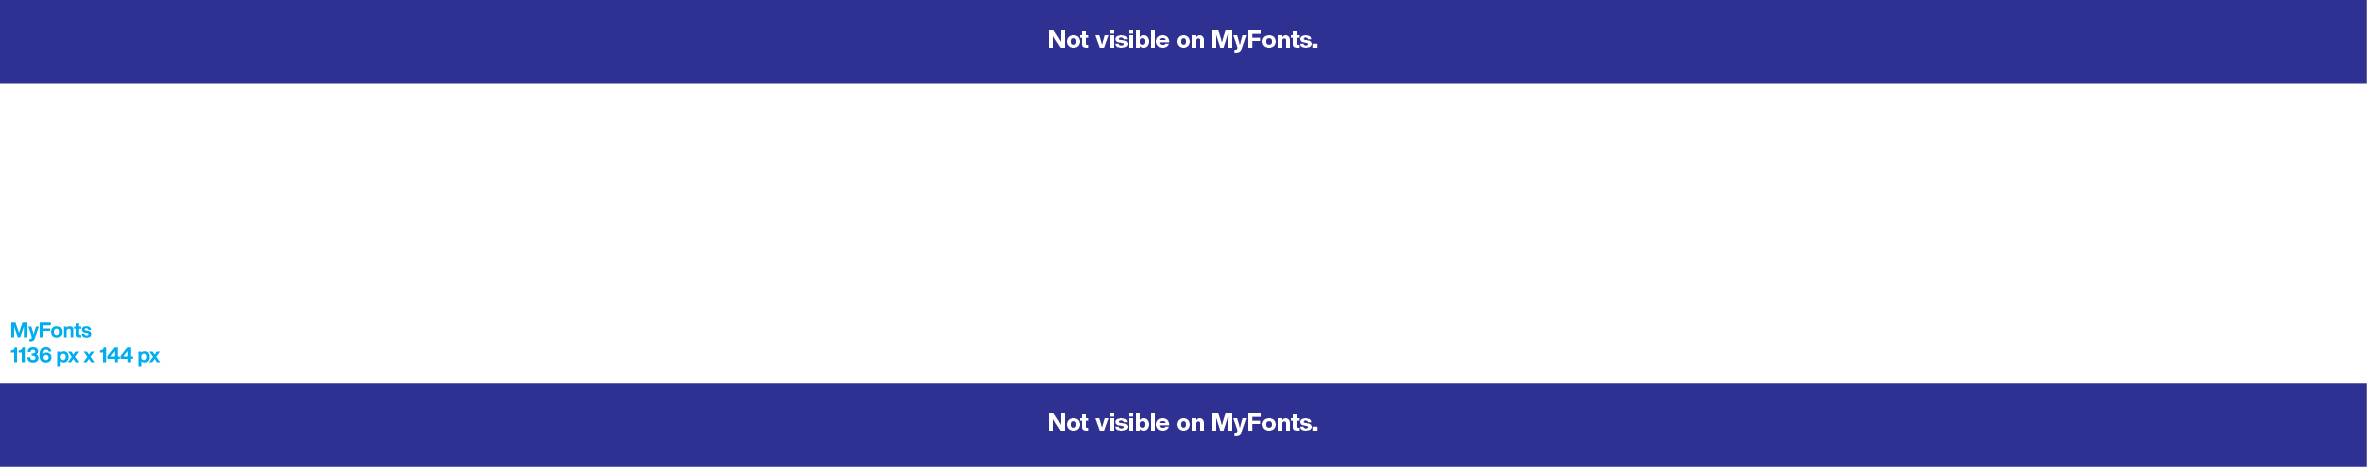 FoundryBanner_SafeZone_MyFonts.png